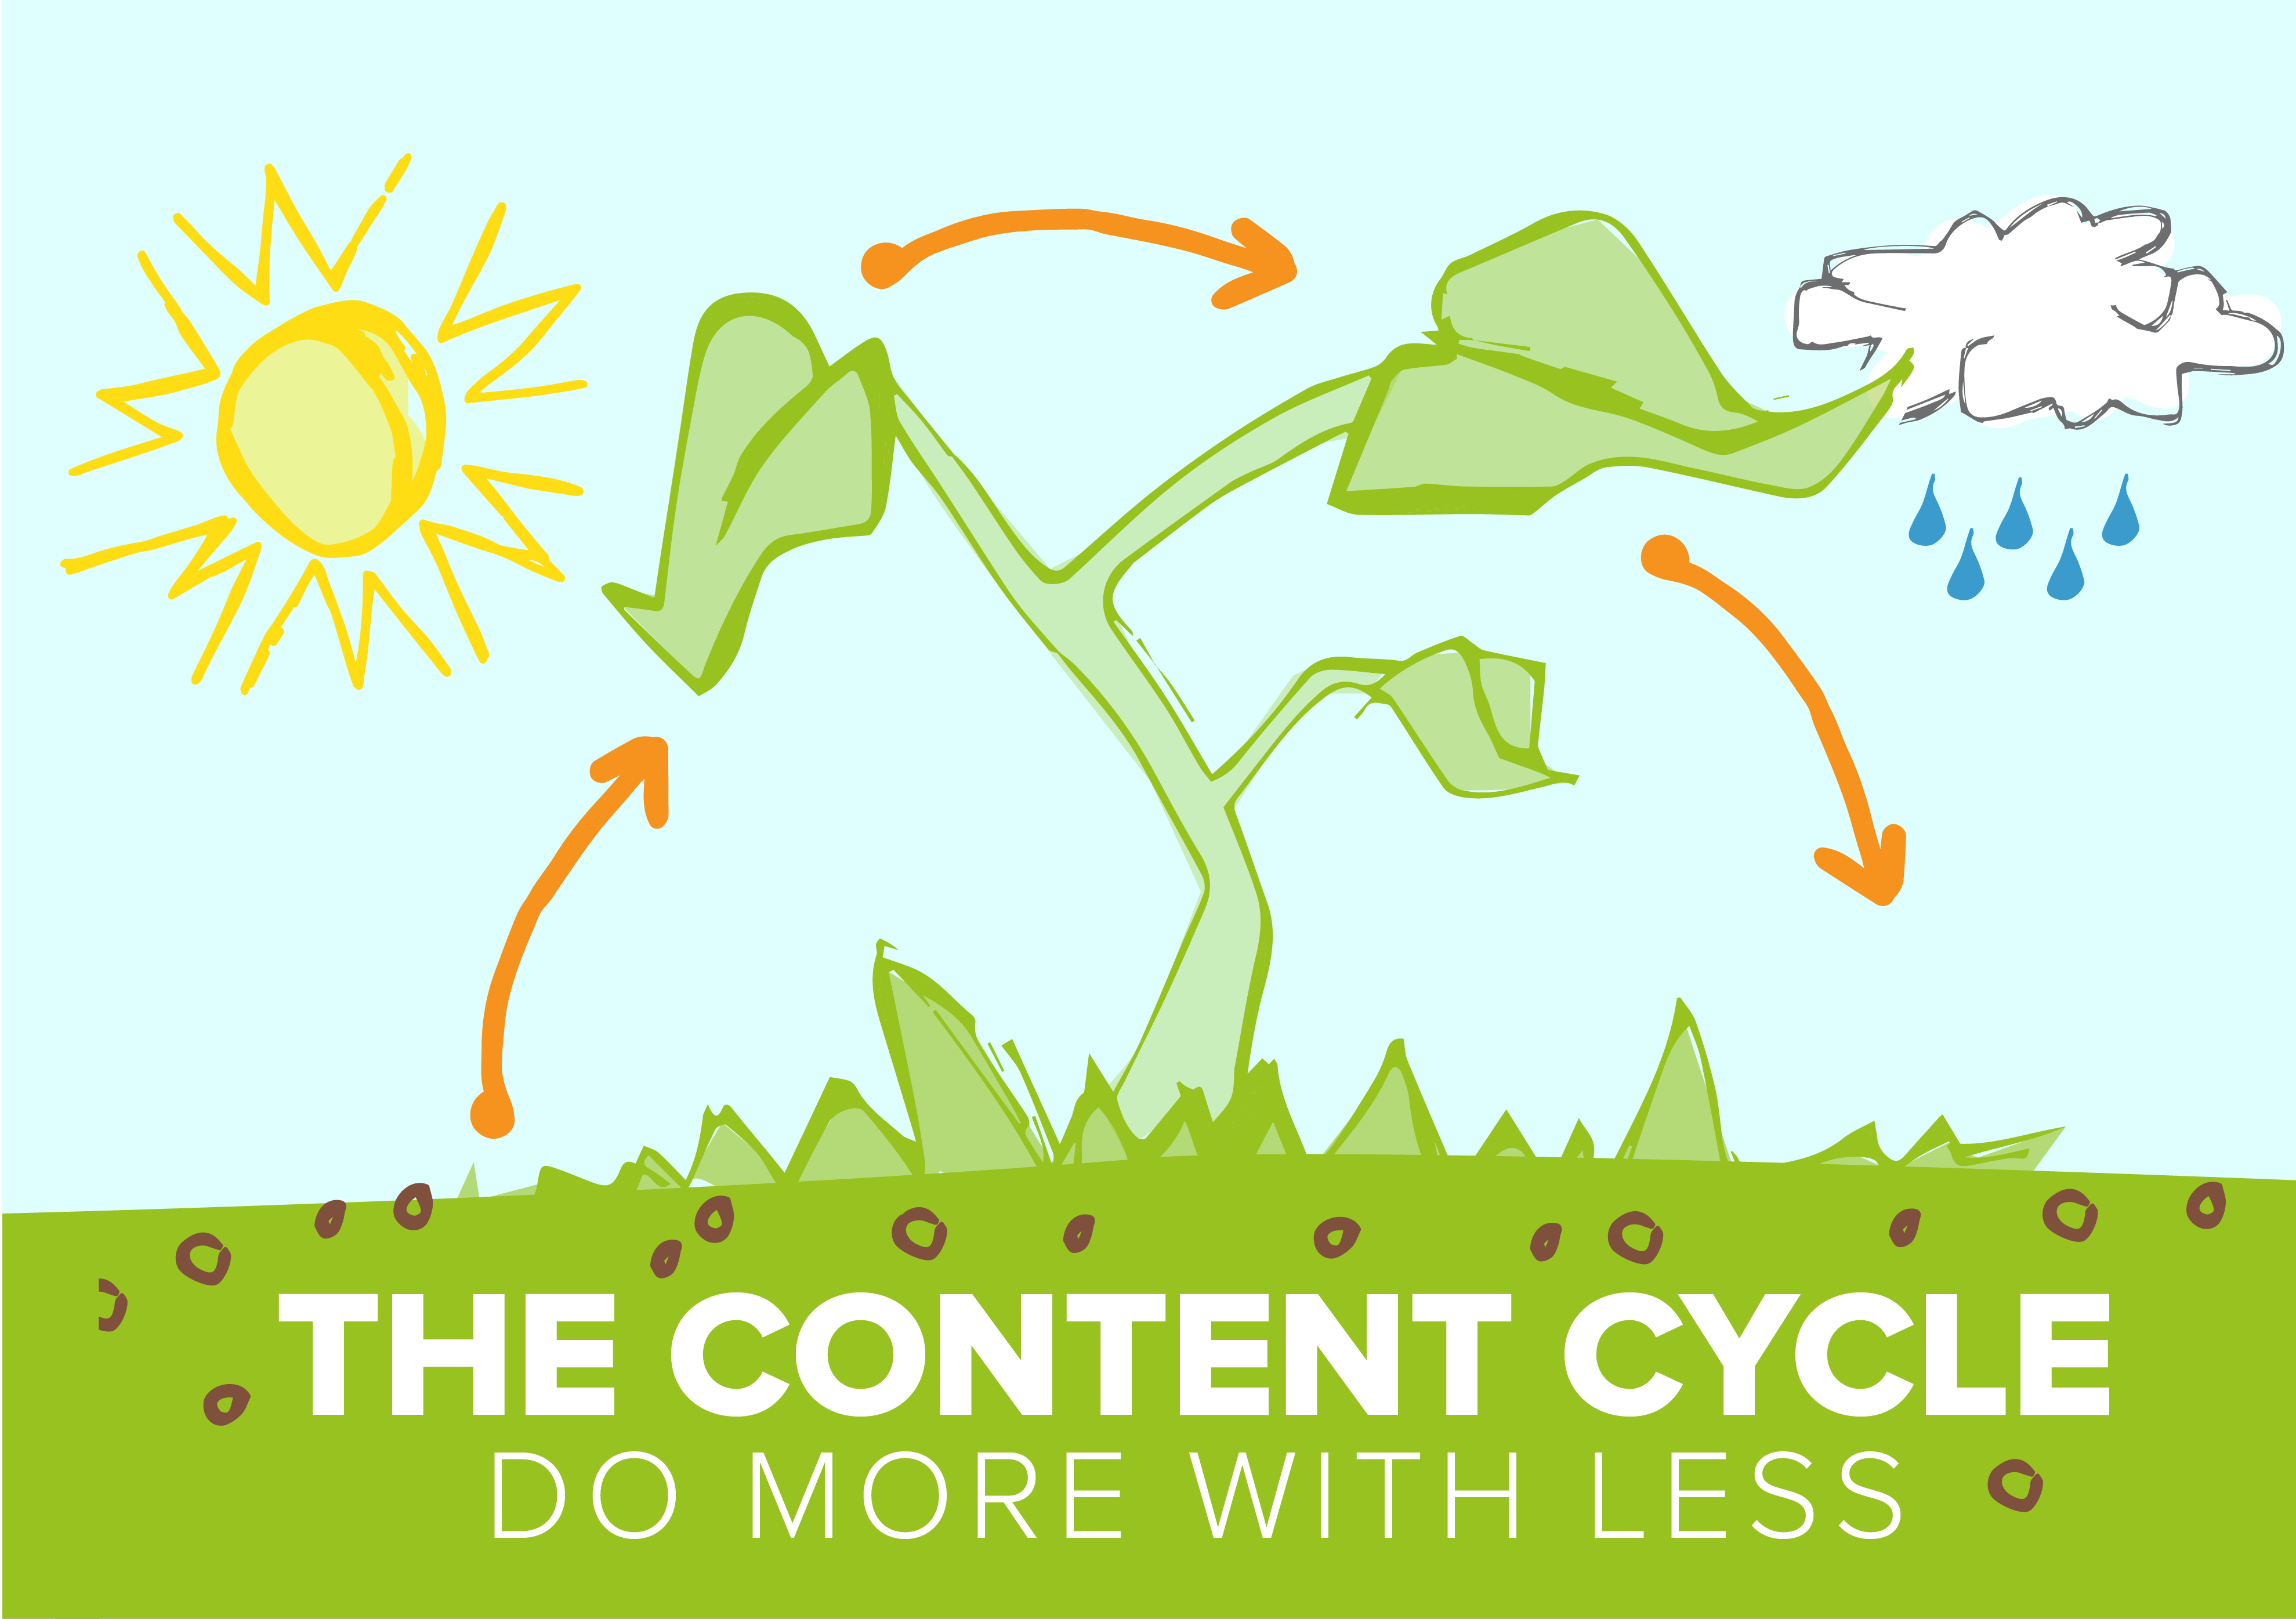 Brafton's new infographic shows how to get more results with less content investment.